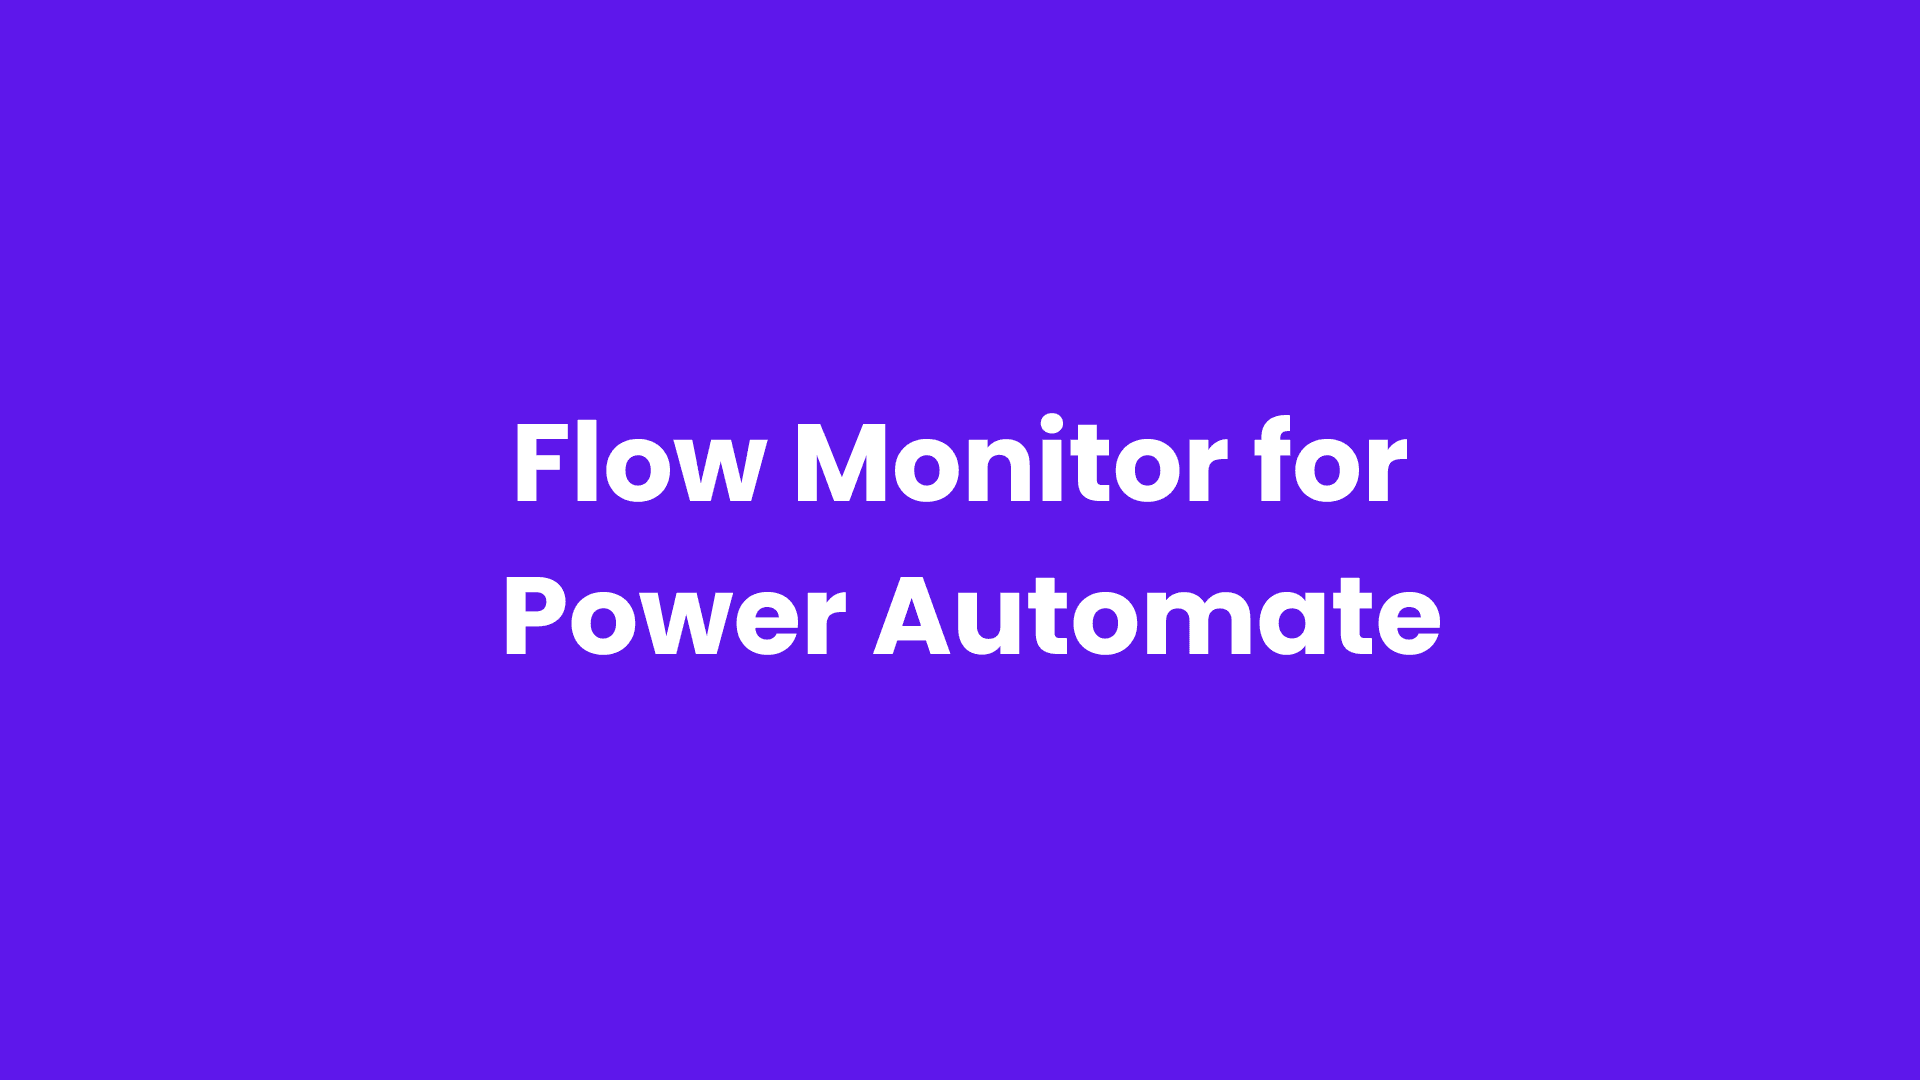 Flow Monitor for Power Automate